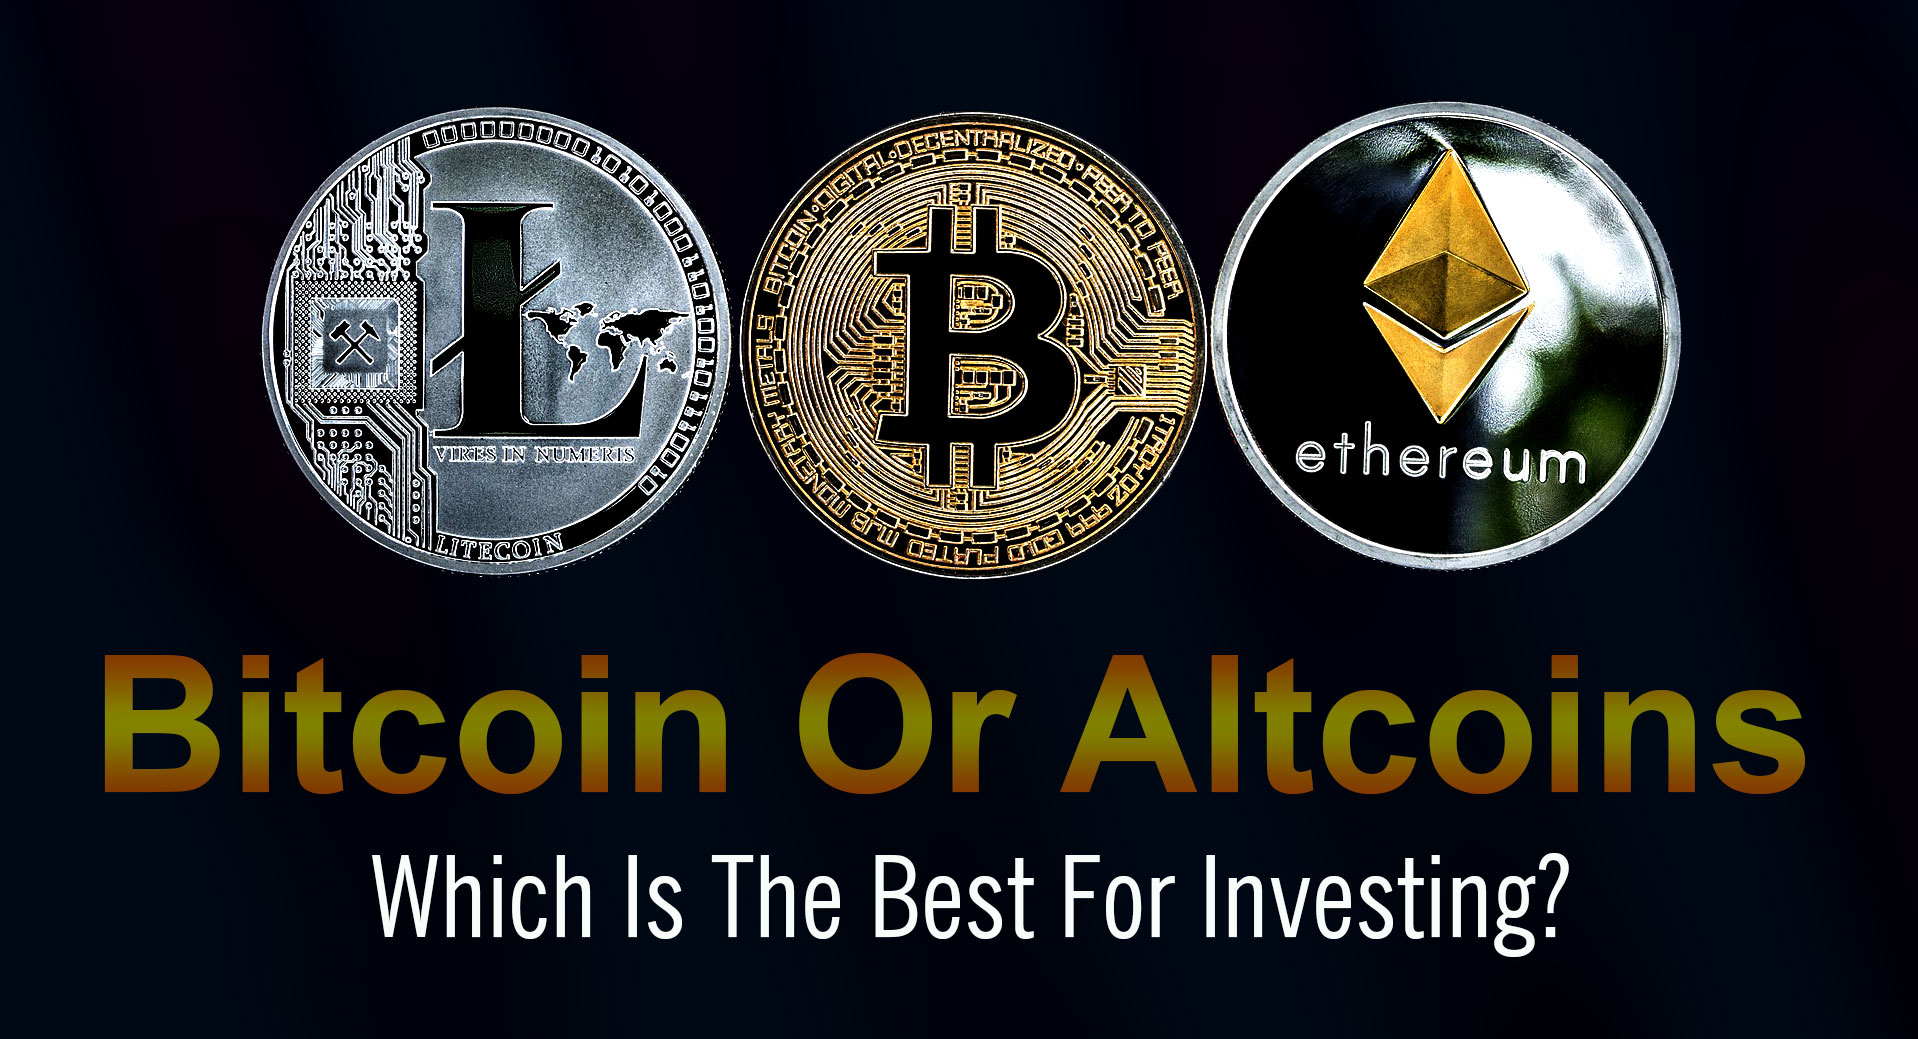 Bitcoin Or Altcoins; Which Is The Best For Investing?